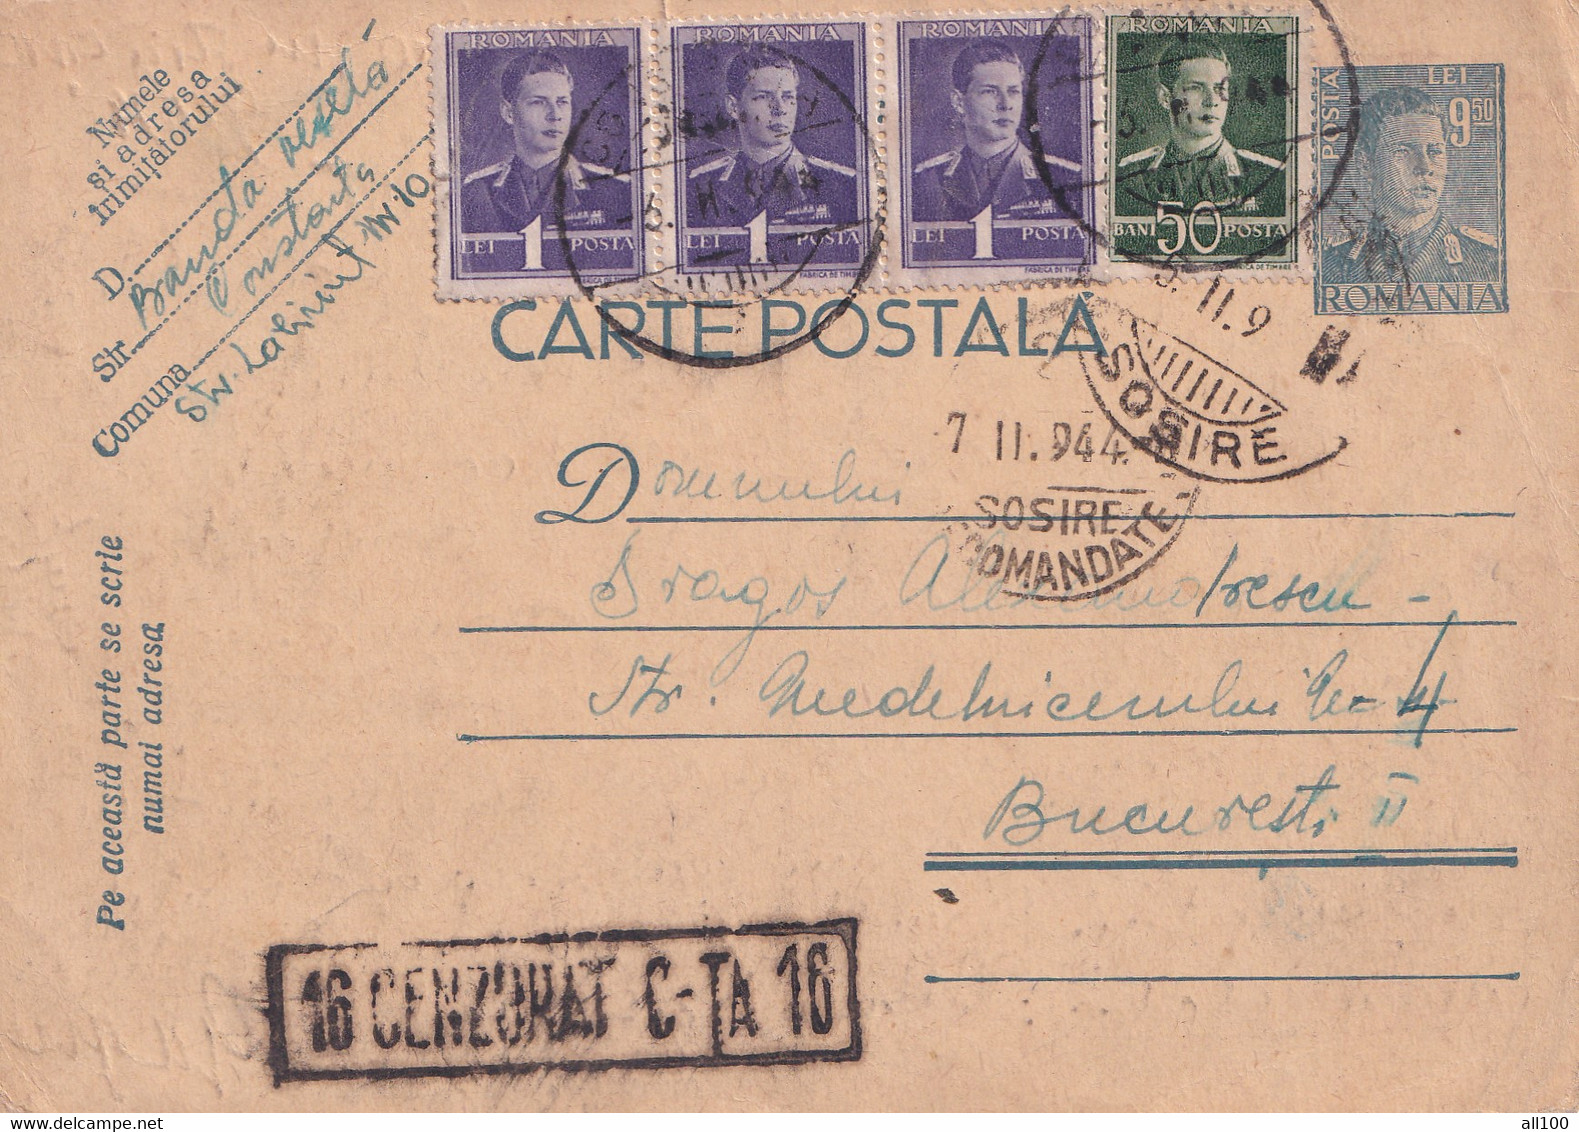 A16424-  MILITARY POSTAL STATIONERY KING MICHAEL 9.5 LEI CENZURAT CONSTANTA NR. 16 1944  USED - 2. Weltkrieg (Briefe)